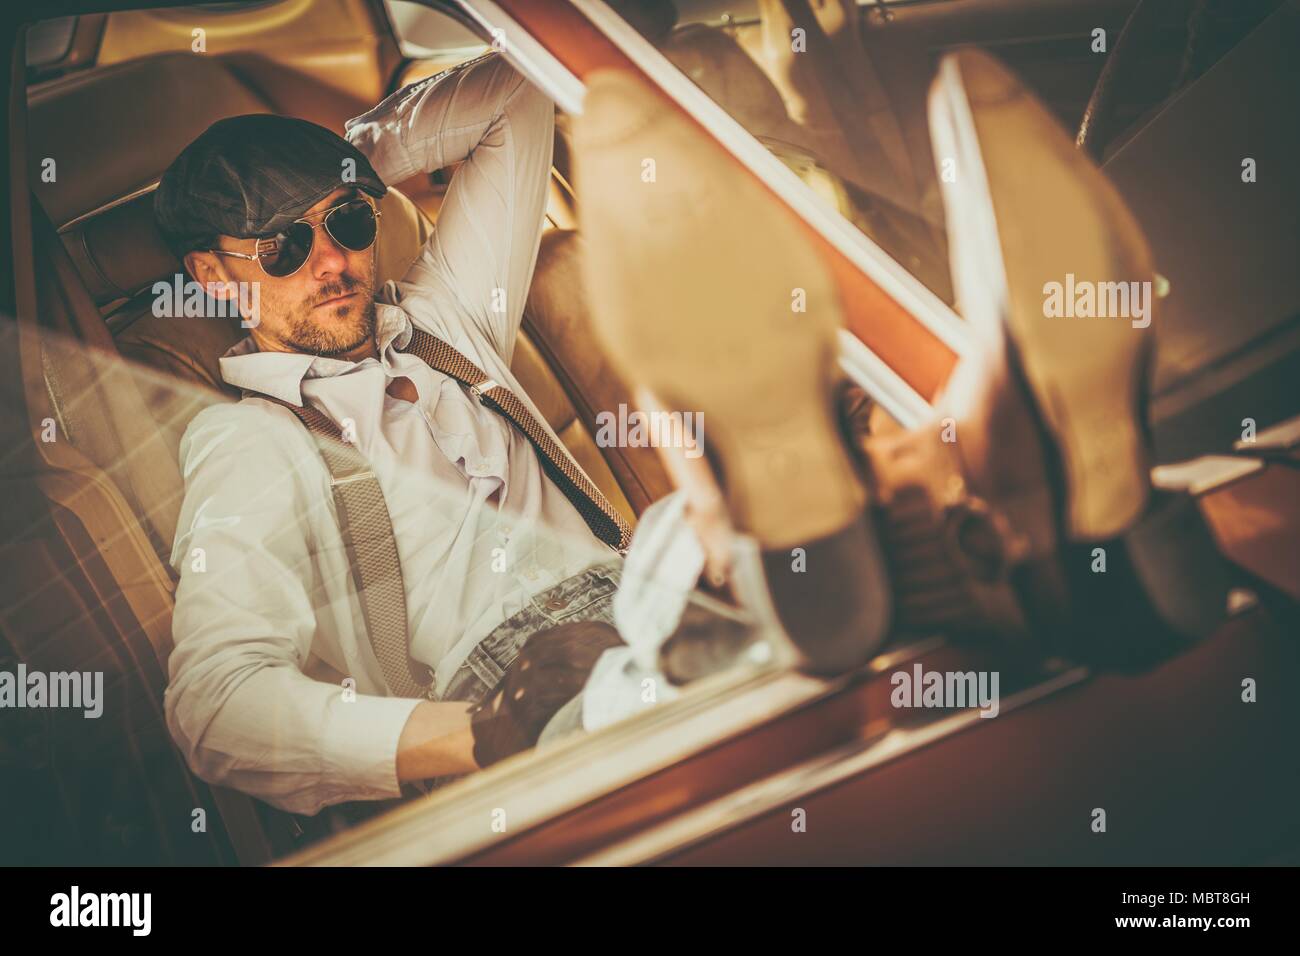 Caucasian Men in His 30s Western Wearing and Sunglasses Enjoying the Moment and in His American Classic Car Keeping His Legs on the Vehicle Door. Stock Photo